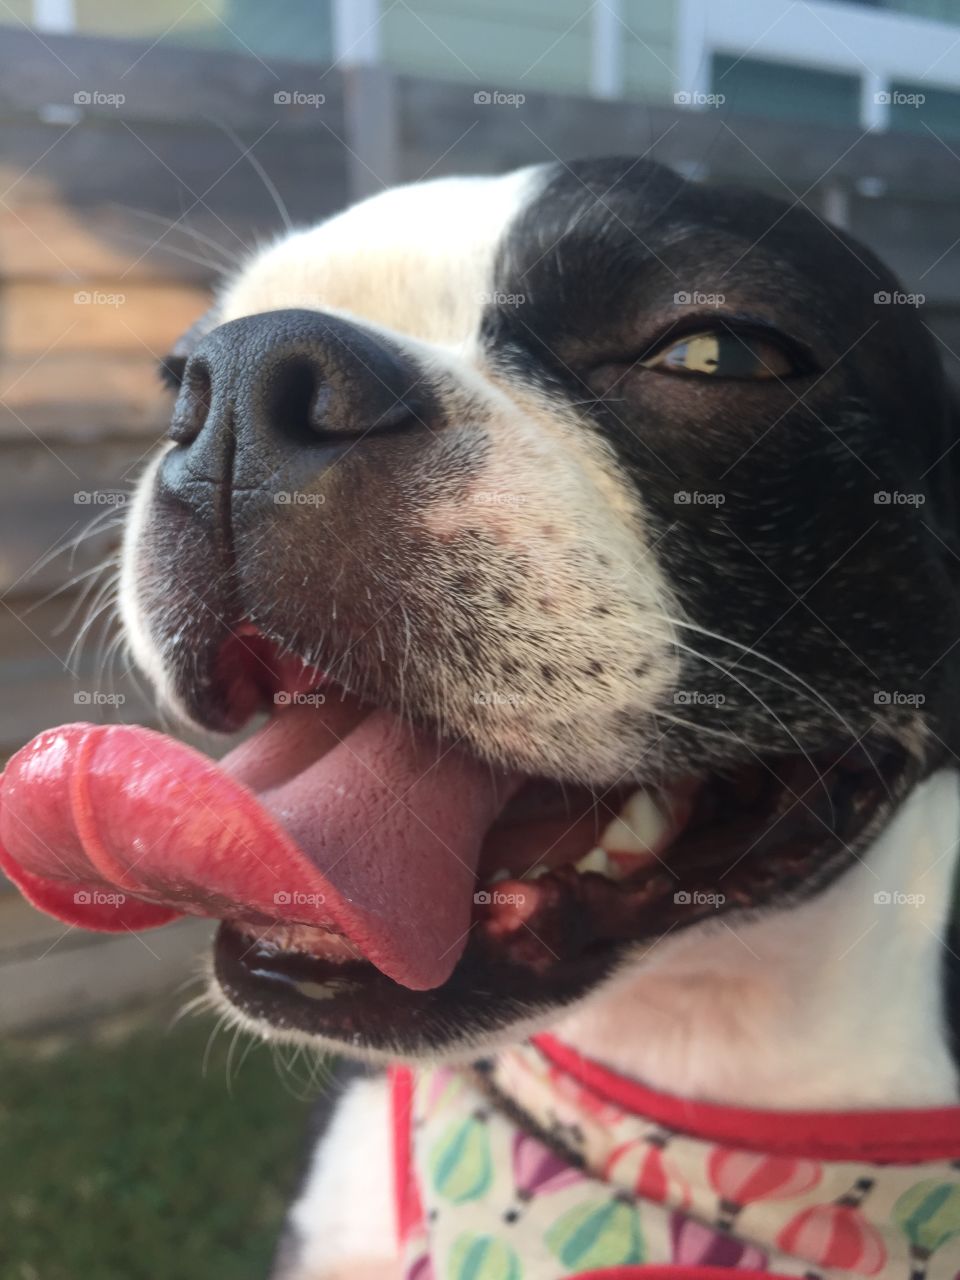 Boston Terrier with tongue sticking out 